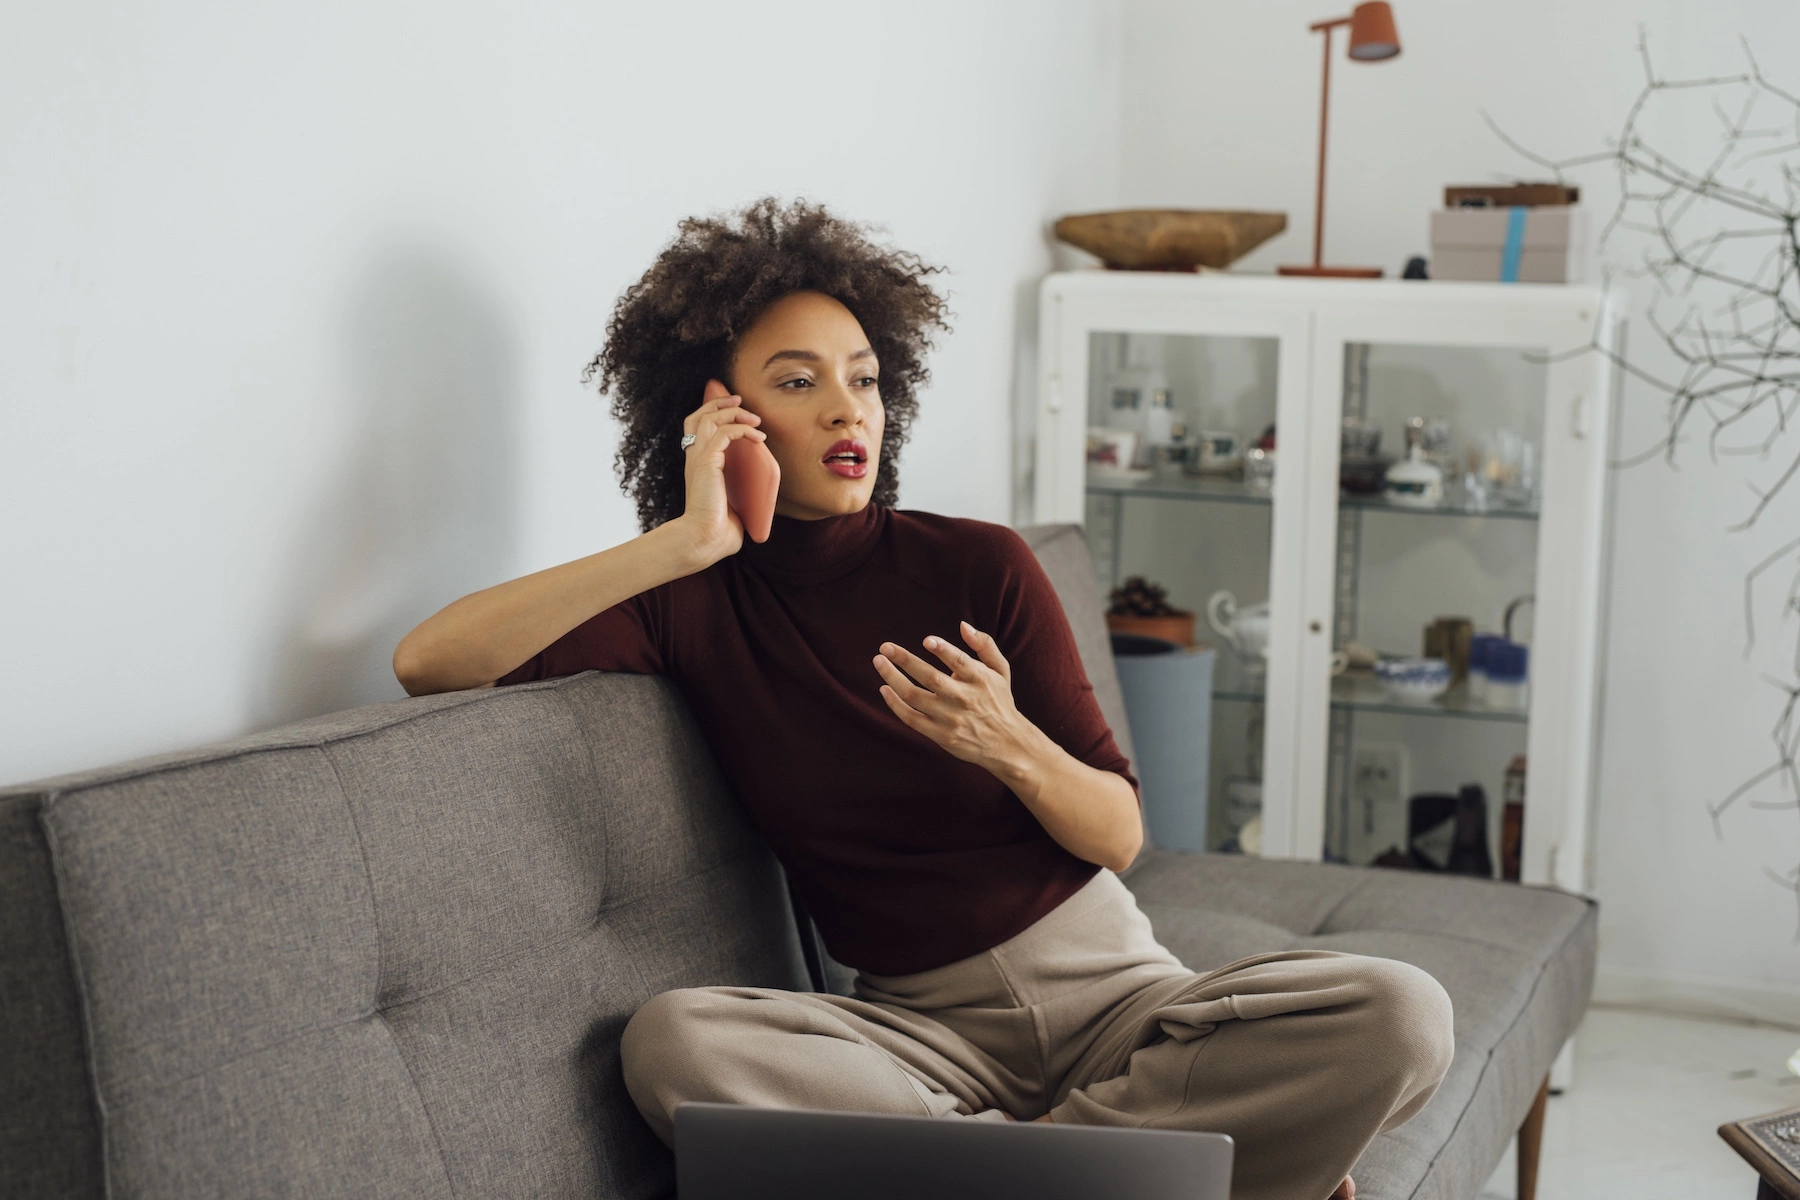 A woman sits speaking on her smartphone in her living room, with a serious expression